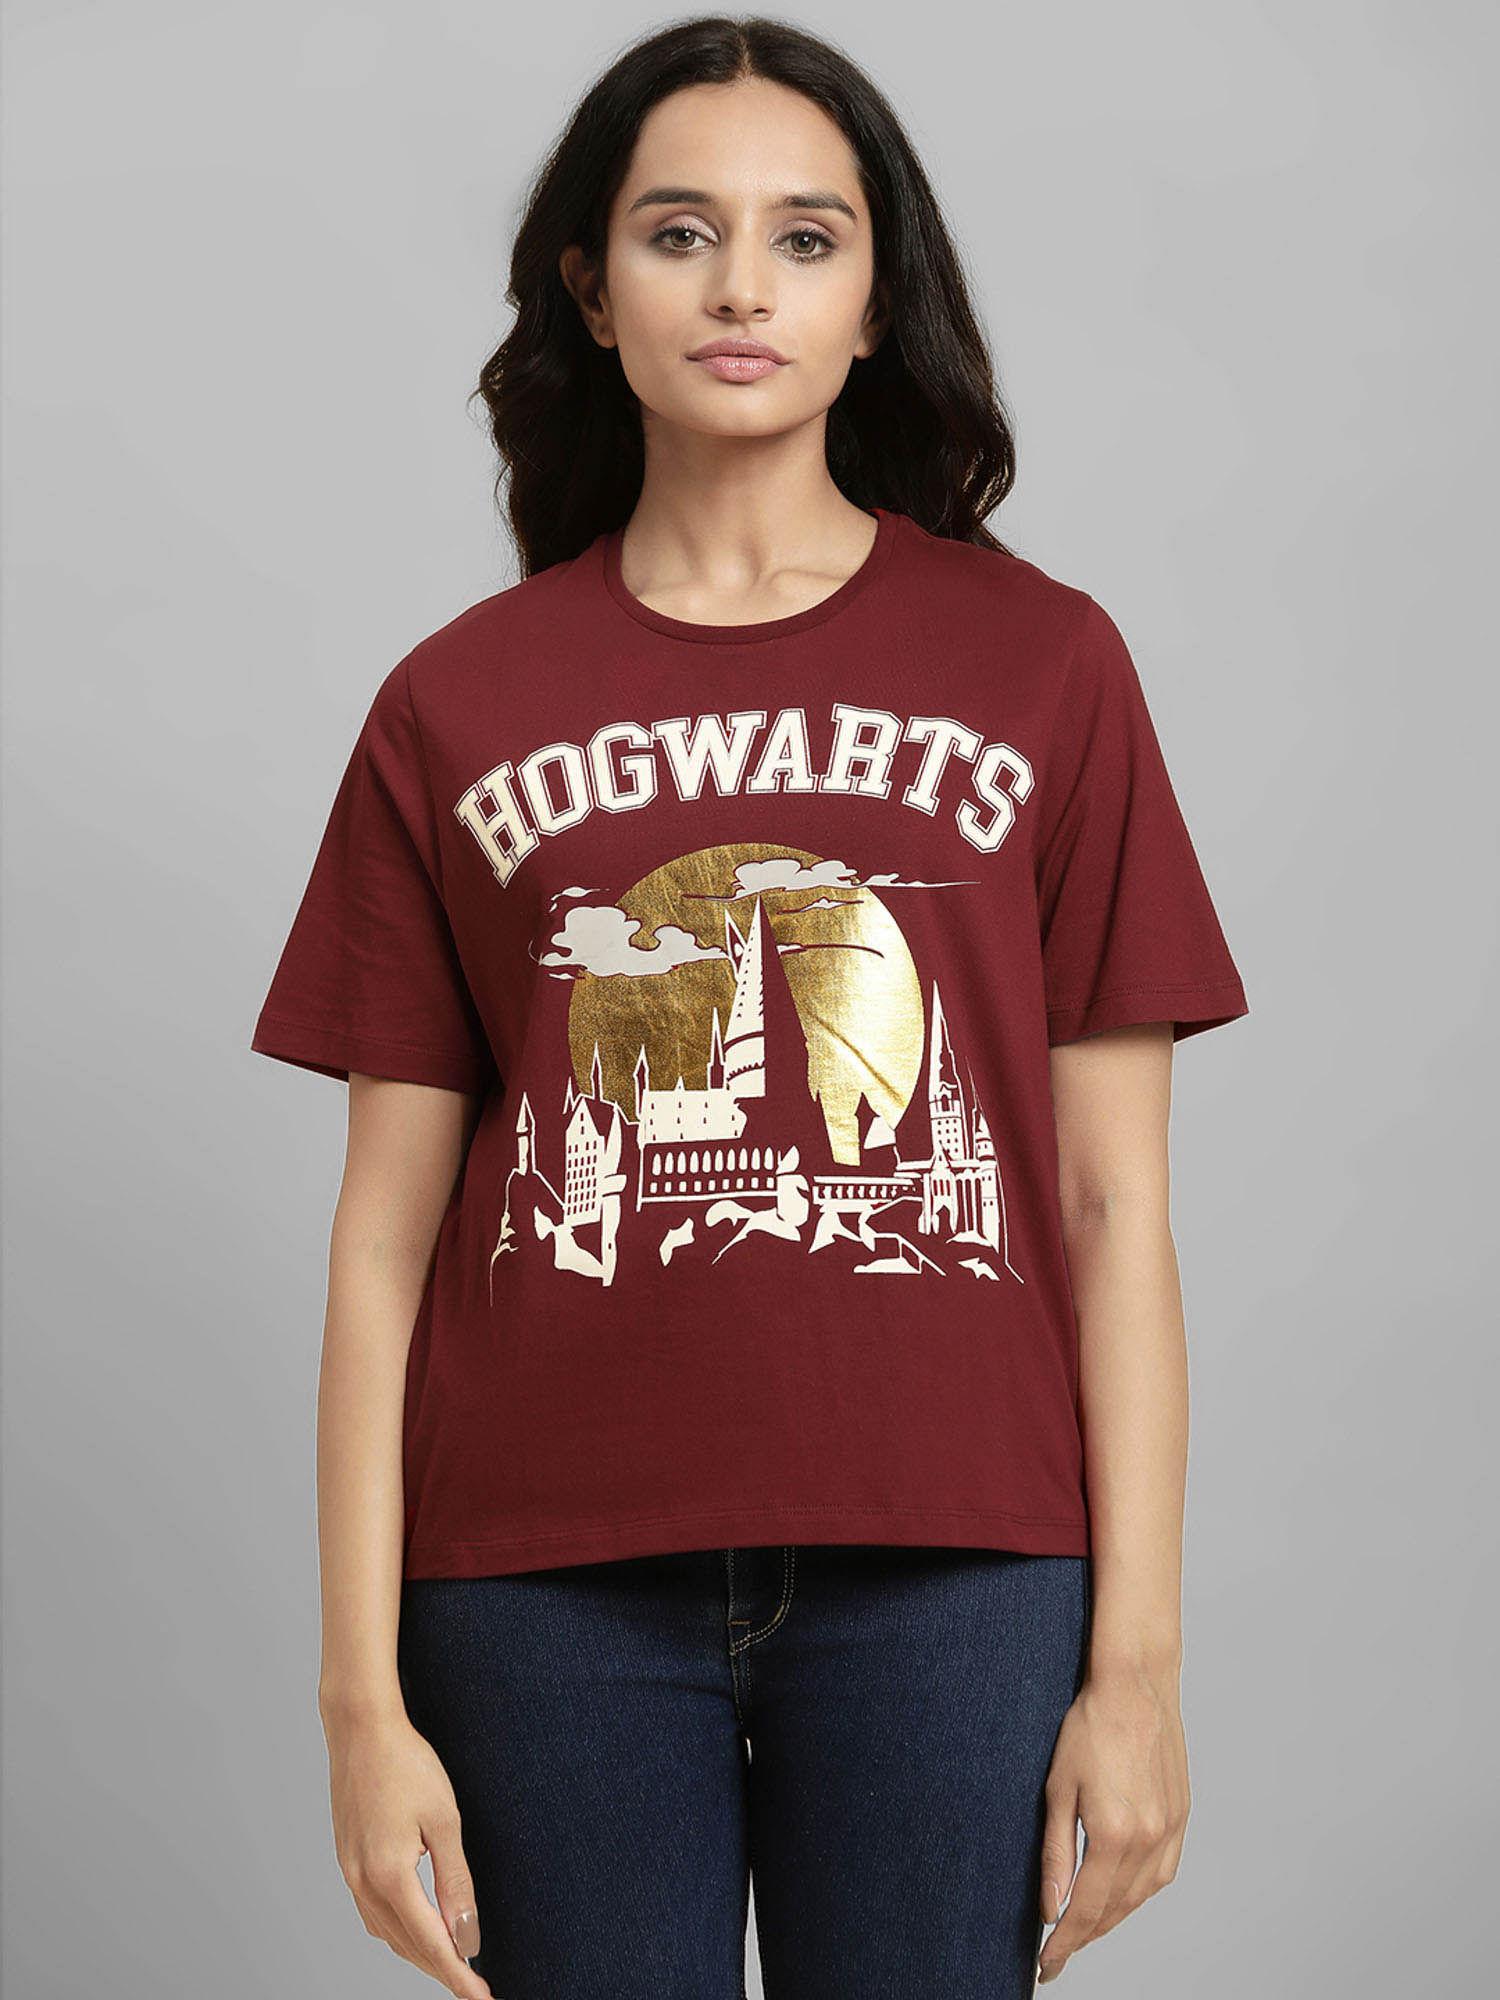 harry potter graphic printed maroon t-shirt for women